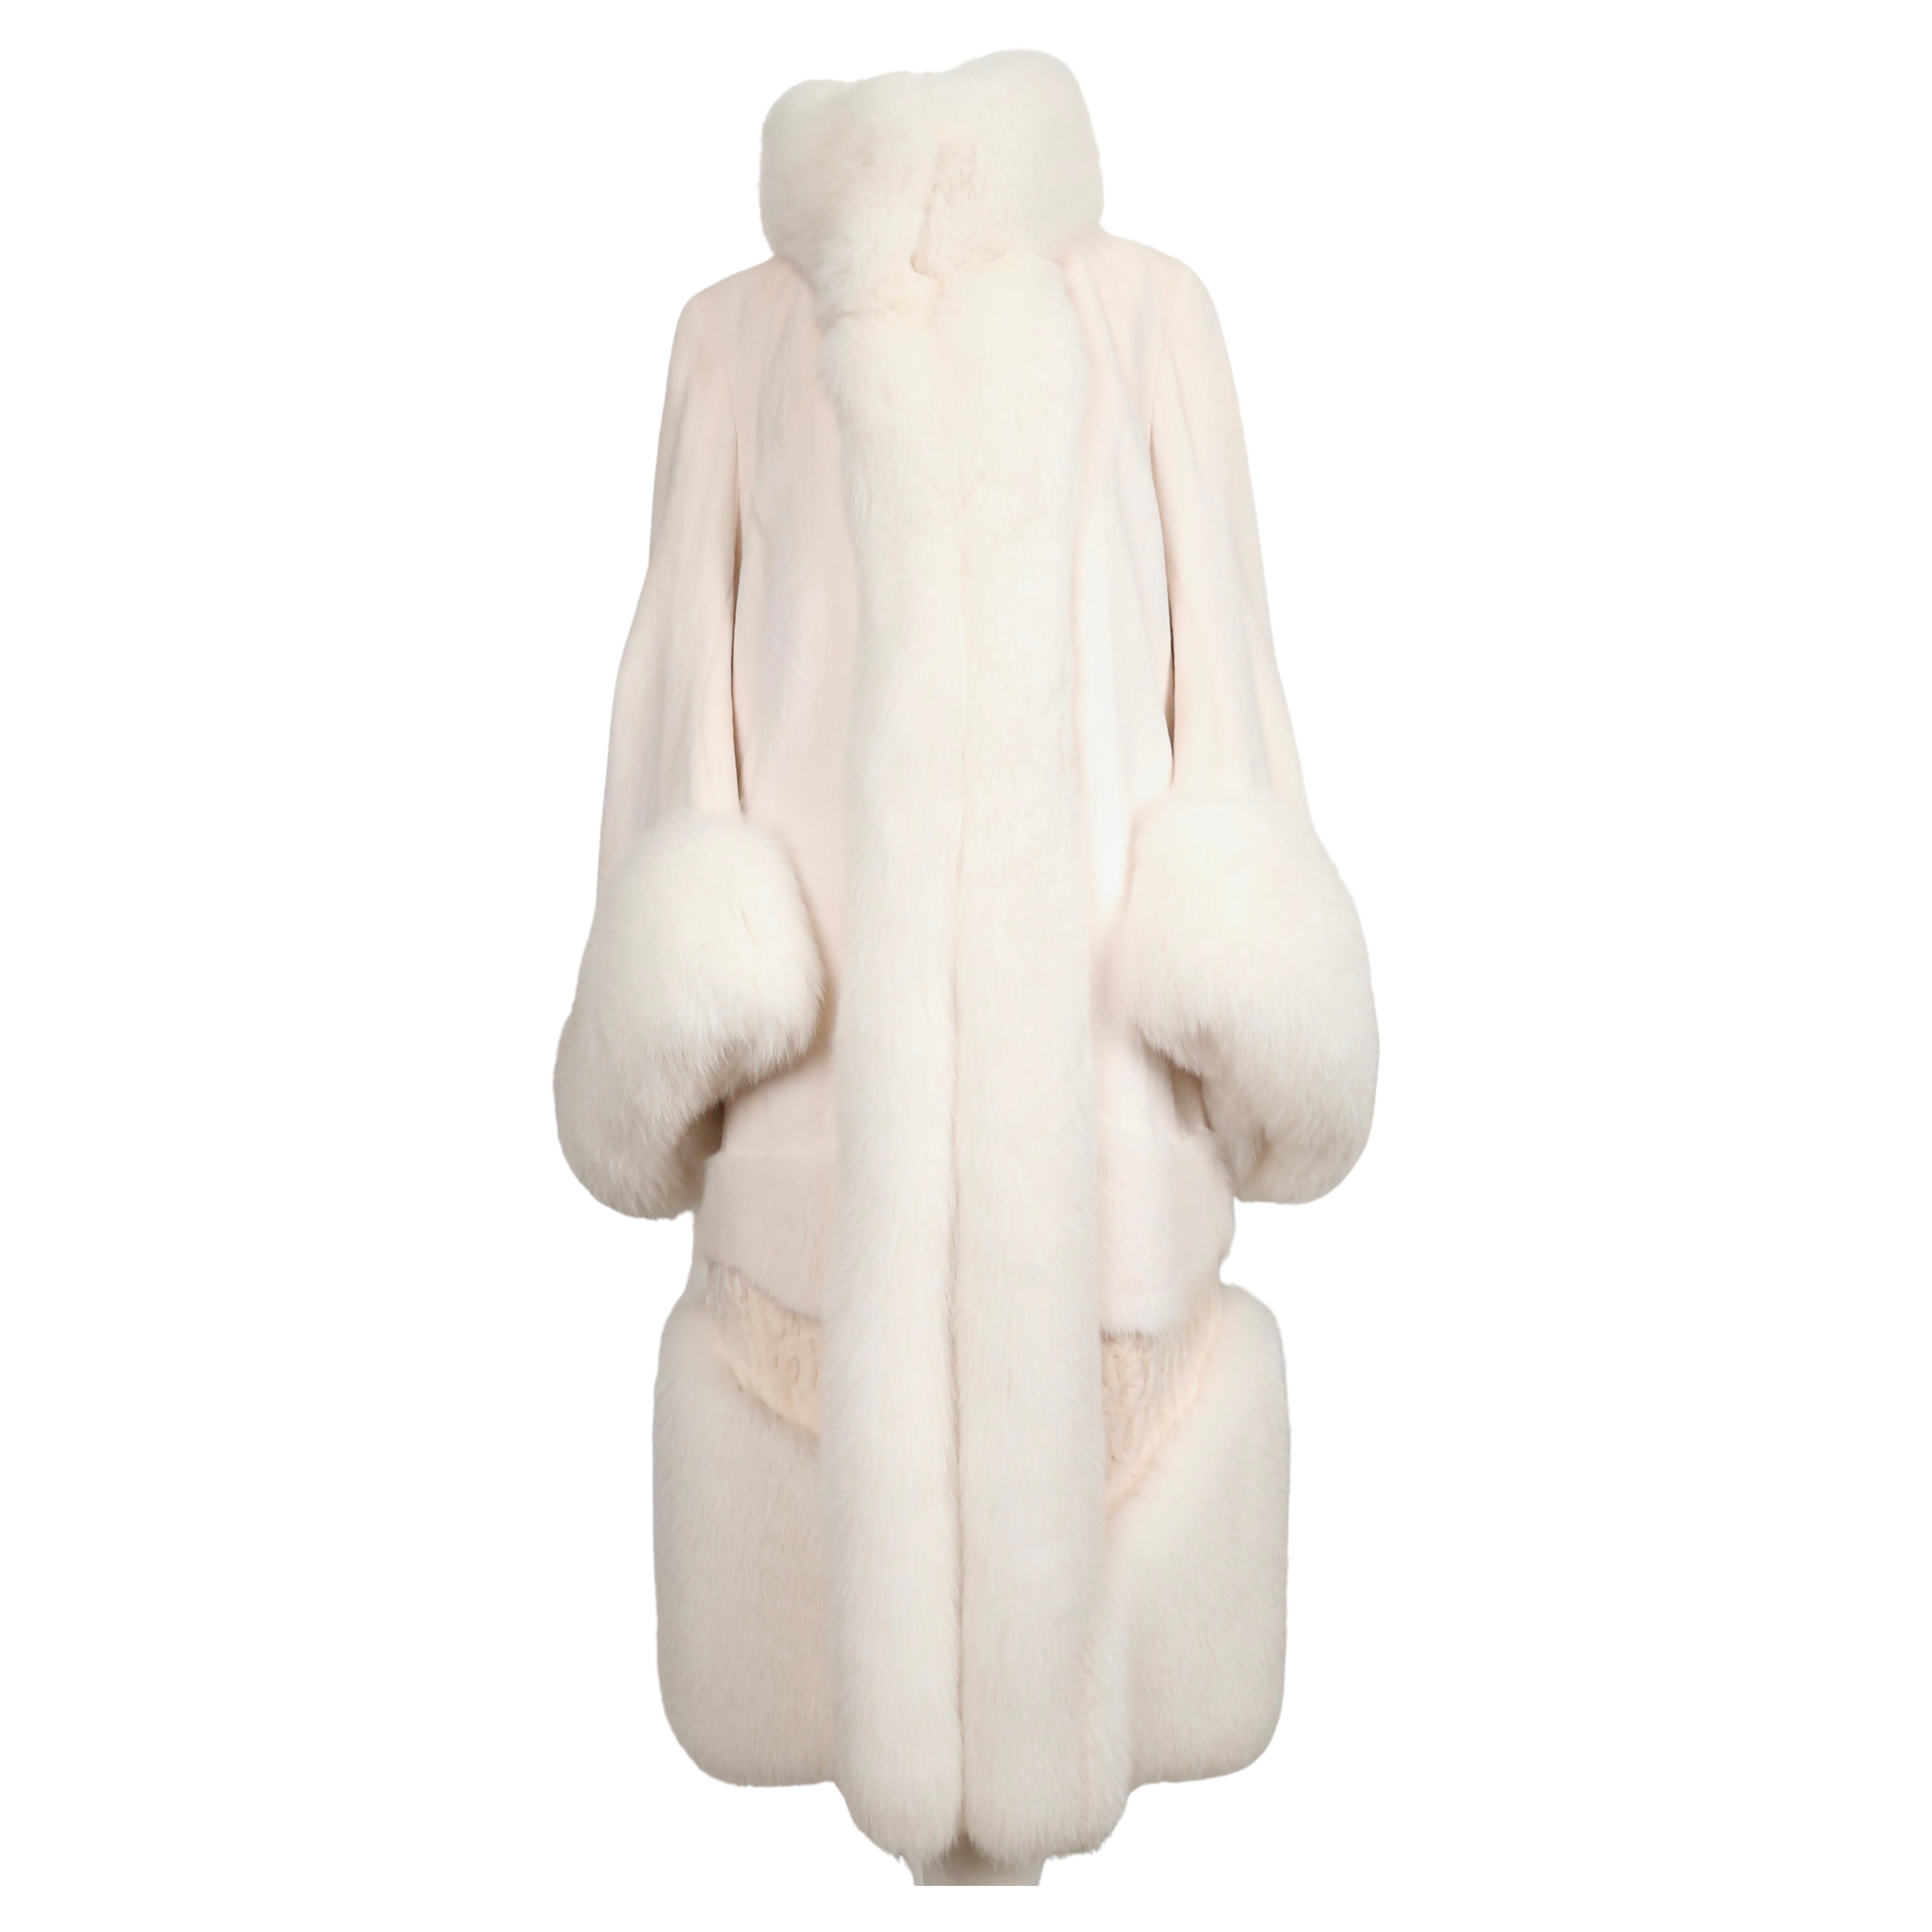 Very rare and dramatic off-white fur coat made of mink, fox and lamb fur from  Alexander McQueen. Labeled an Italian size 42. Approximate measurements: shoulder 16